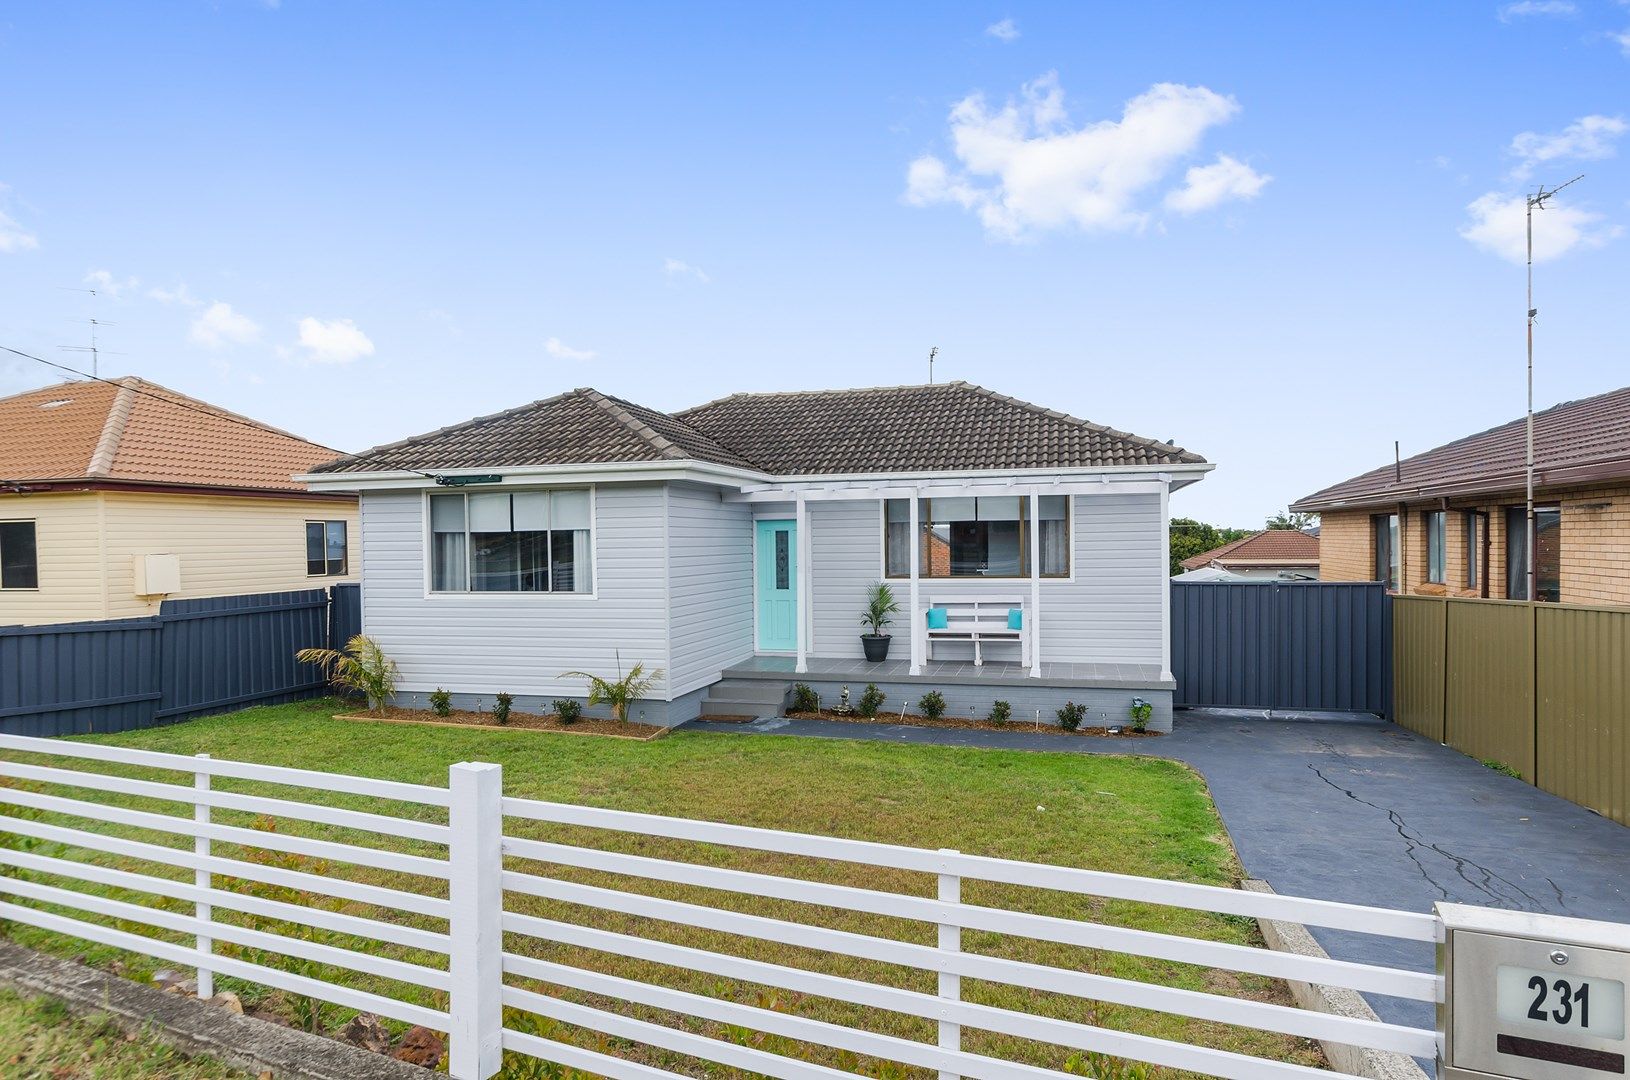 231 Shellharbour Rd, Barrack Heights NSW 2528, Image 0